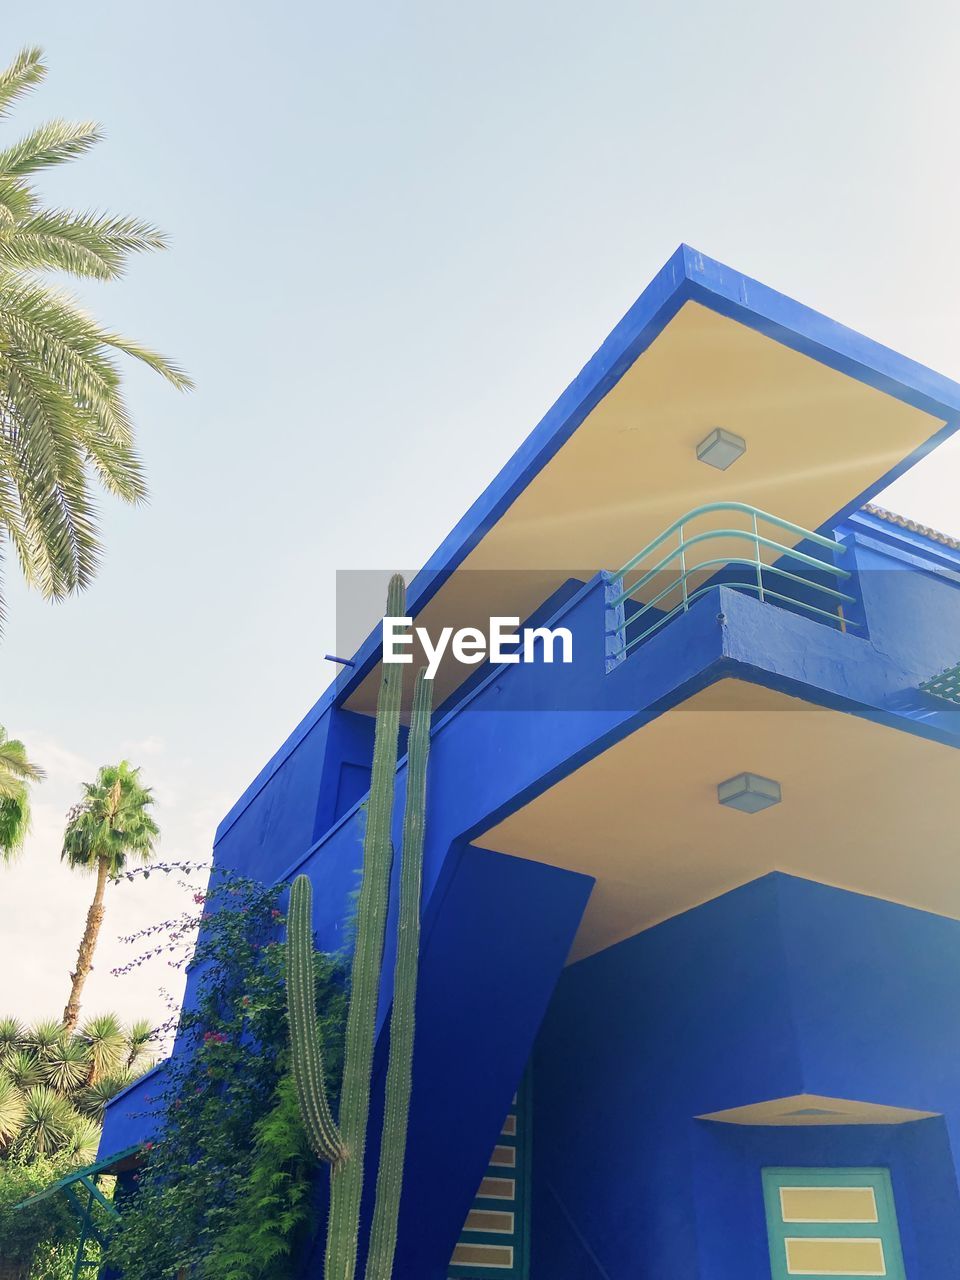 architecture, building exterior, built structure, blue, palm tree, tropical climate, house, sky, nature, tree, building, facade, no people, low angle view, plant, day, clear sky, outdoors, residential district, travel destinations, city